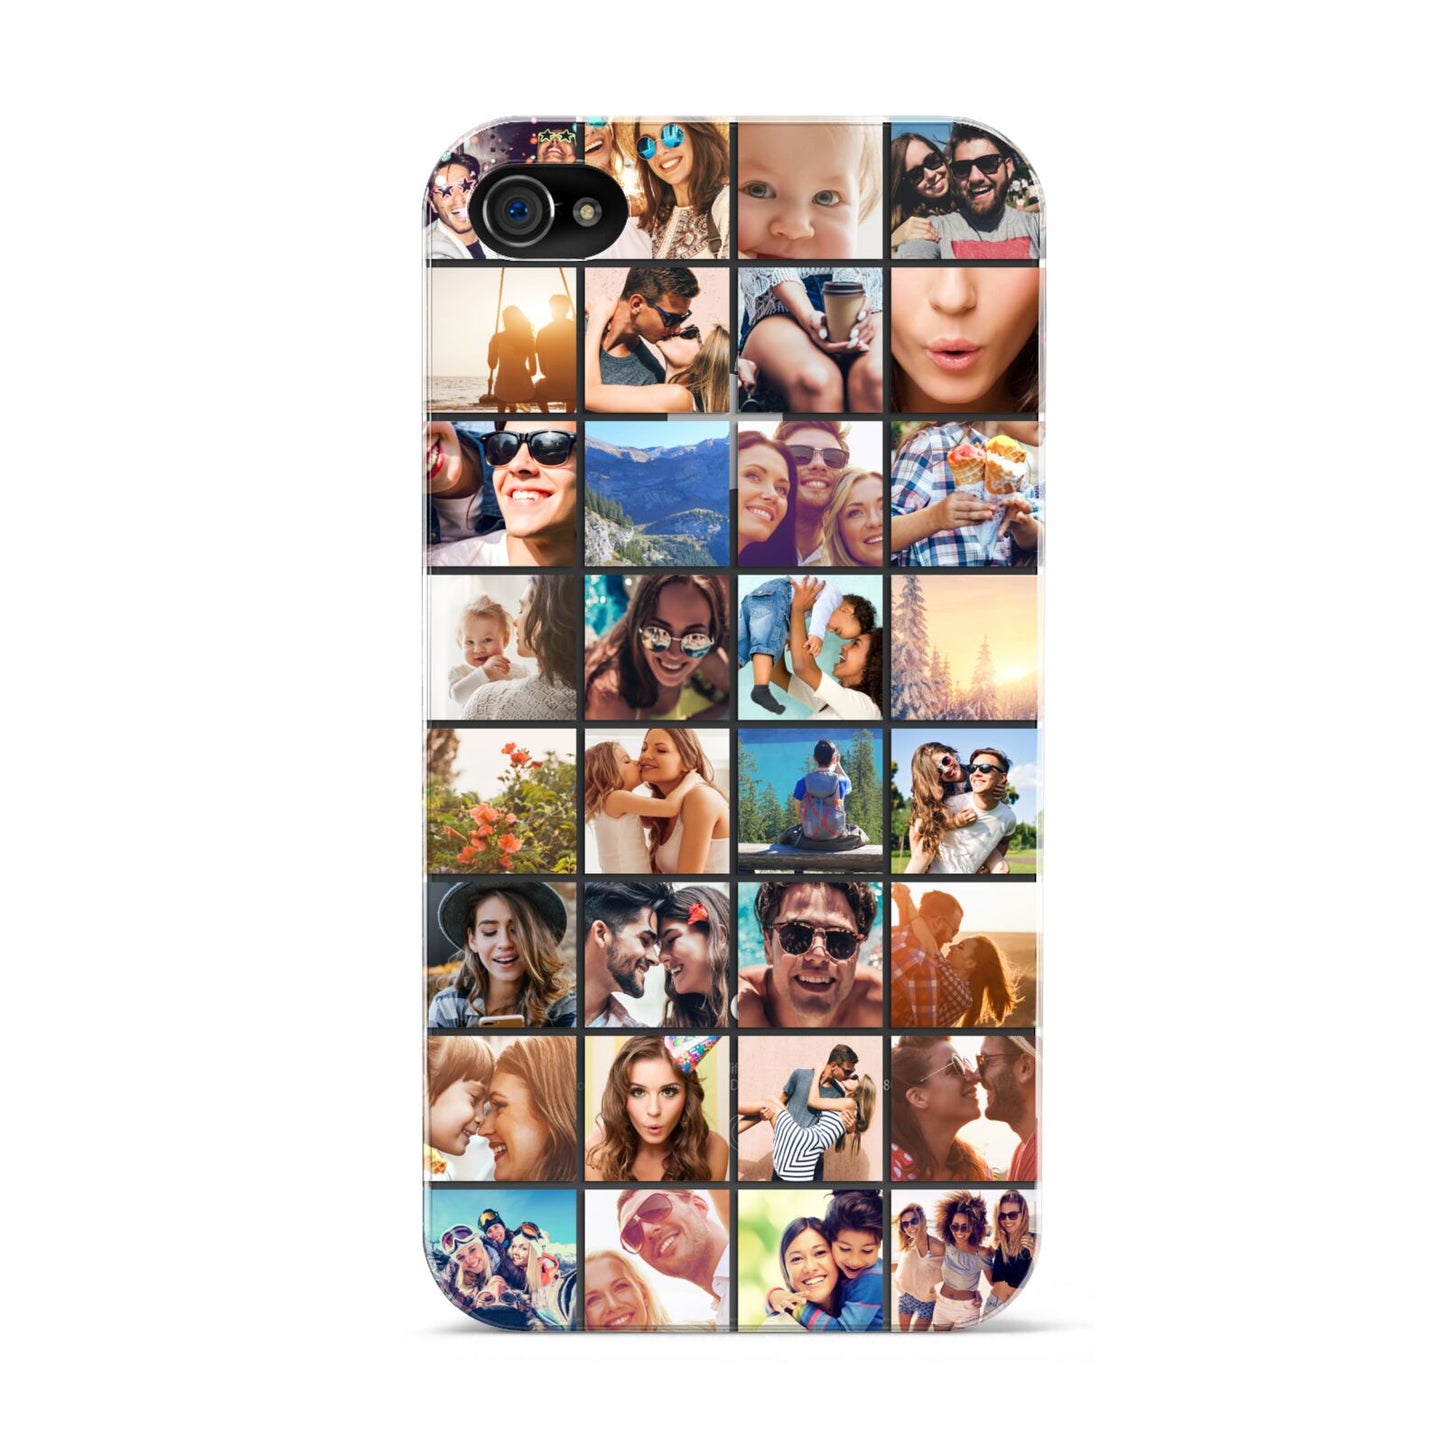 Ultimate Photo Montage Upload Apple iPhone 4s Case